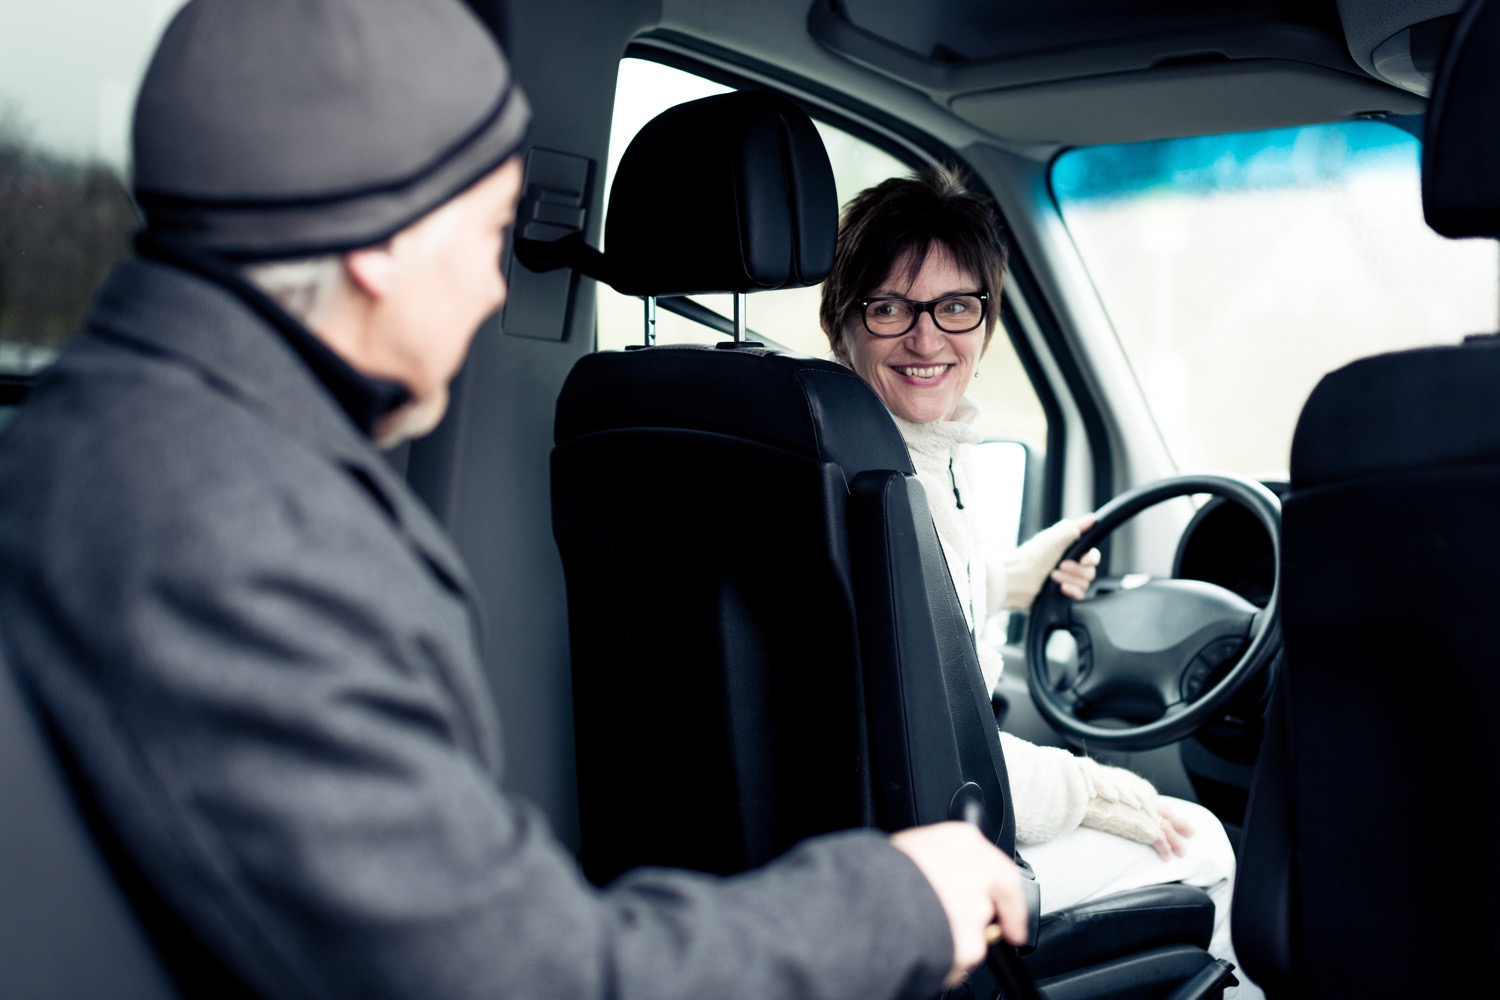 A female driver helps an older man by providing transportation services for seniors.